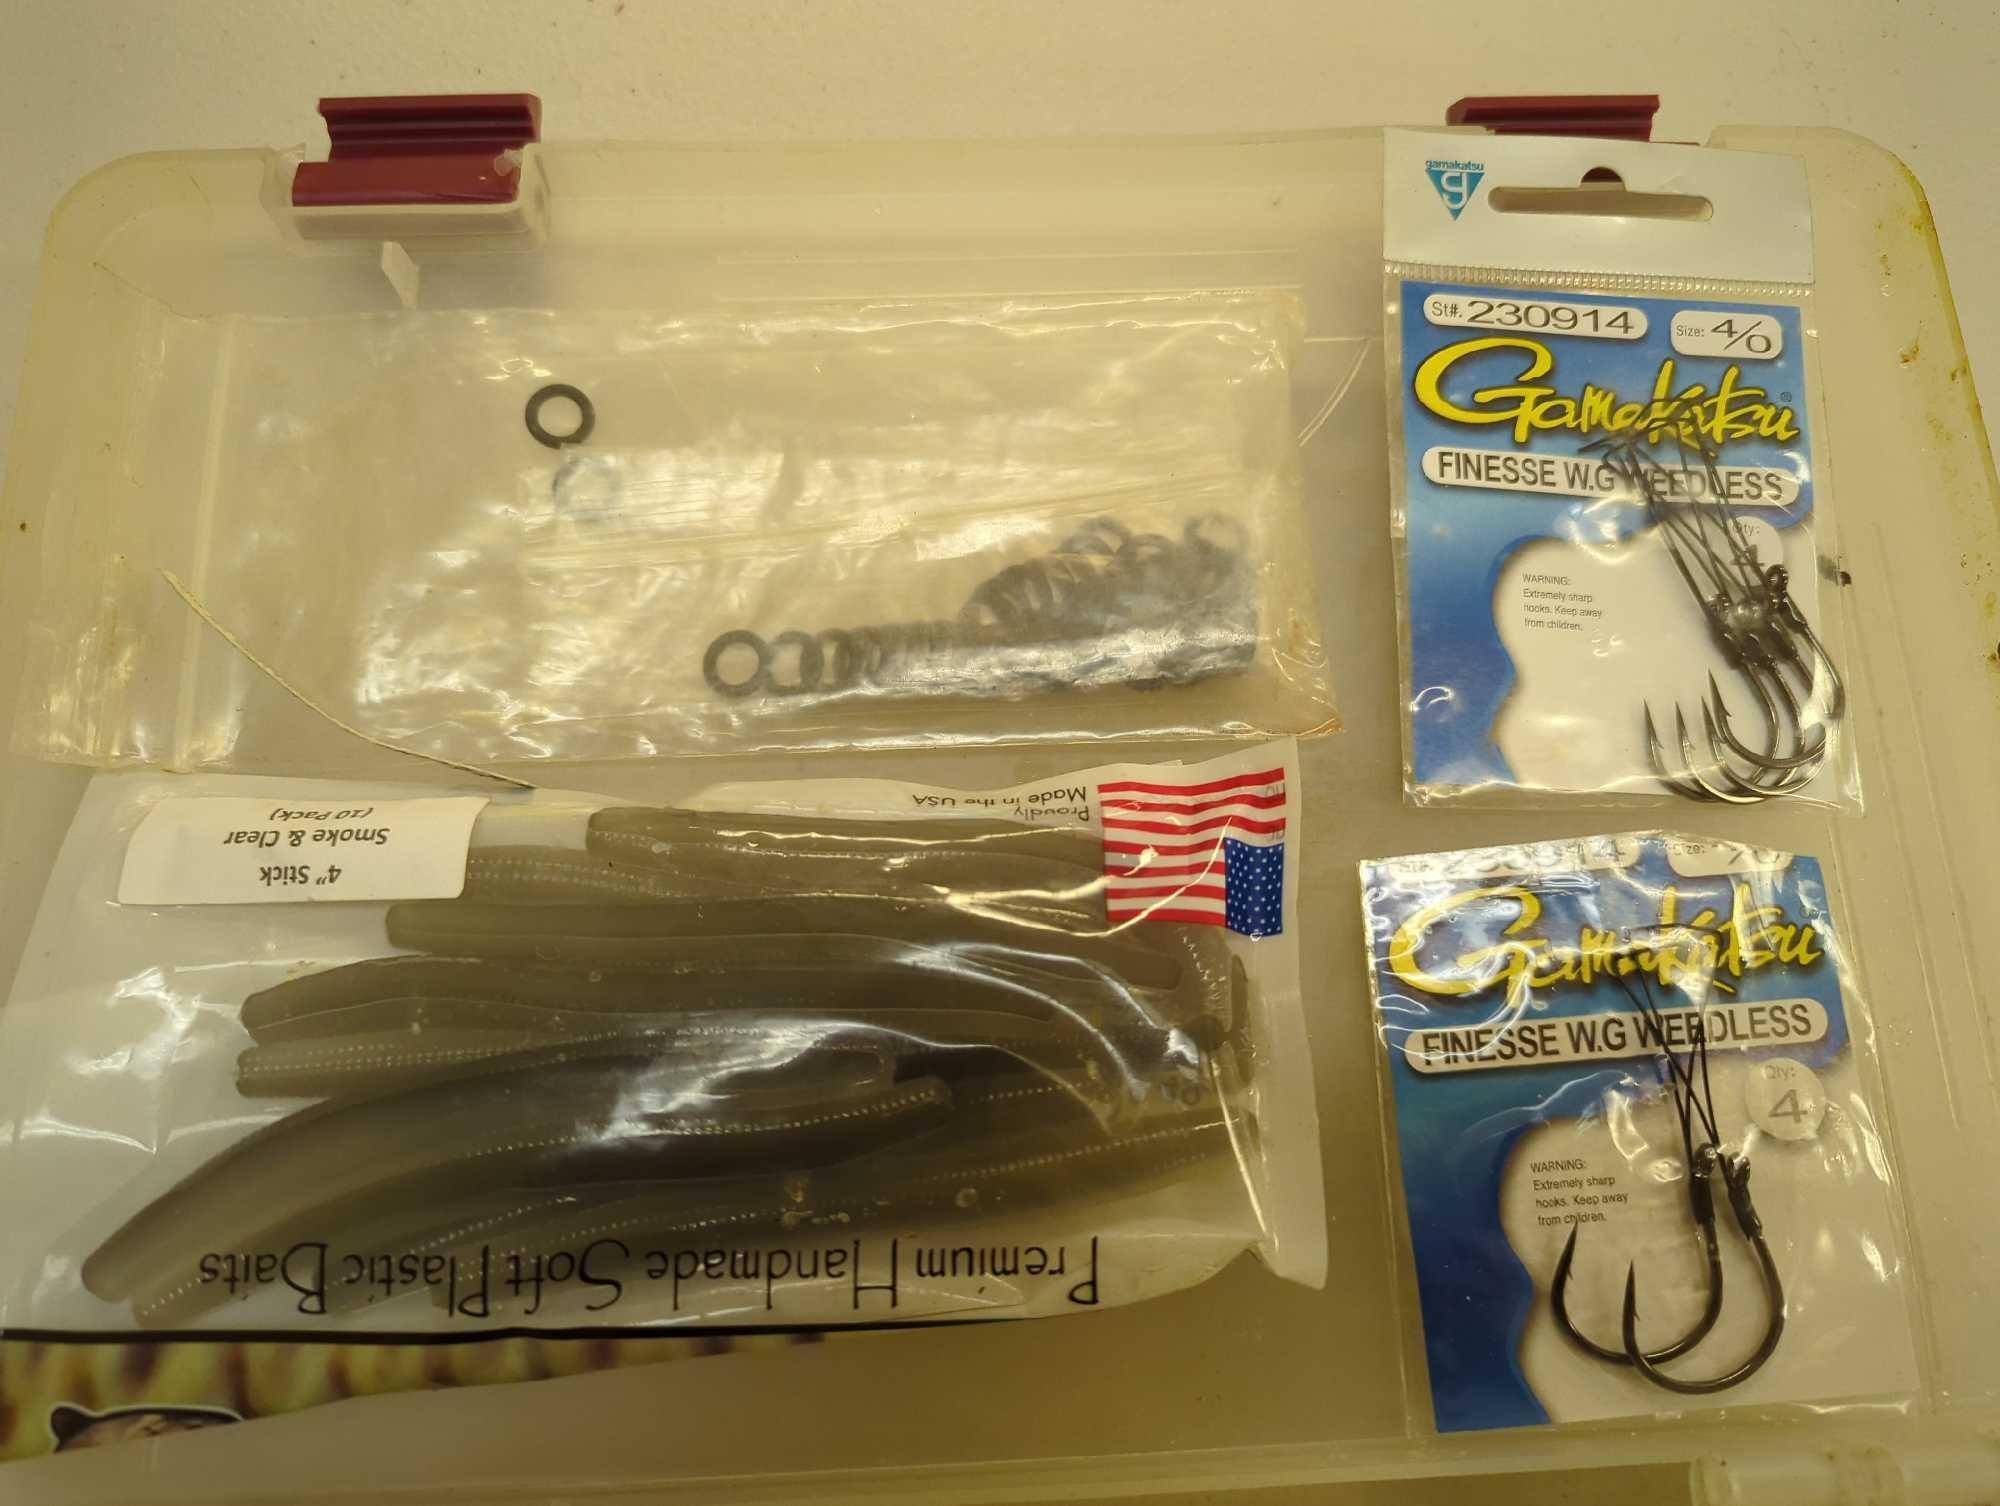 Tackle Box and contents includes various fishing worm lures. Comes as is shown in photos. Appears to